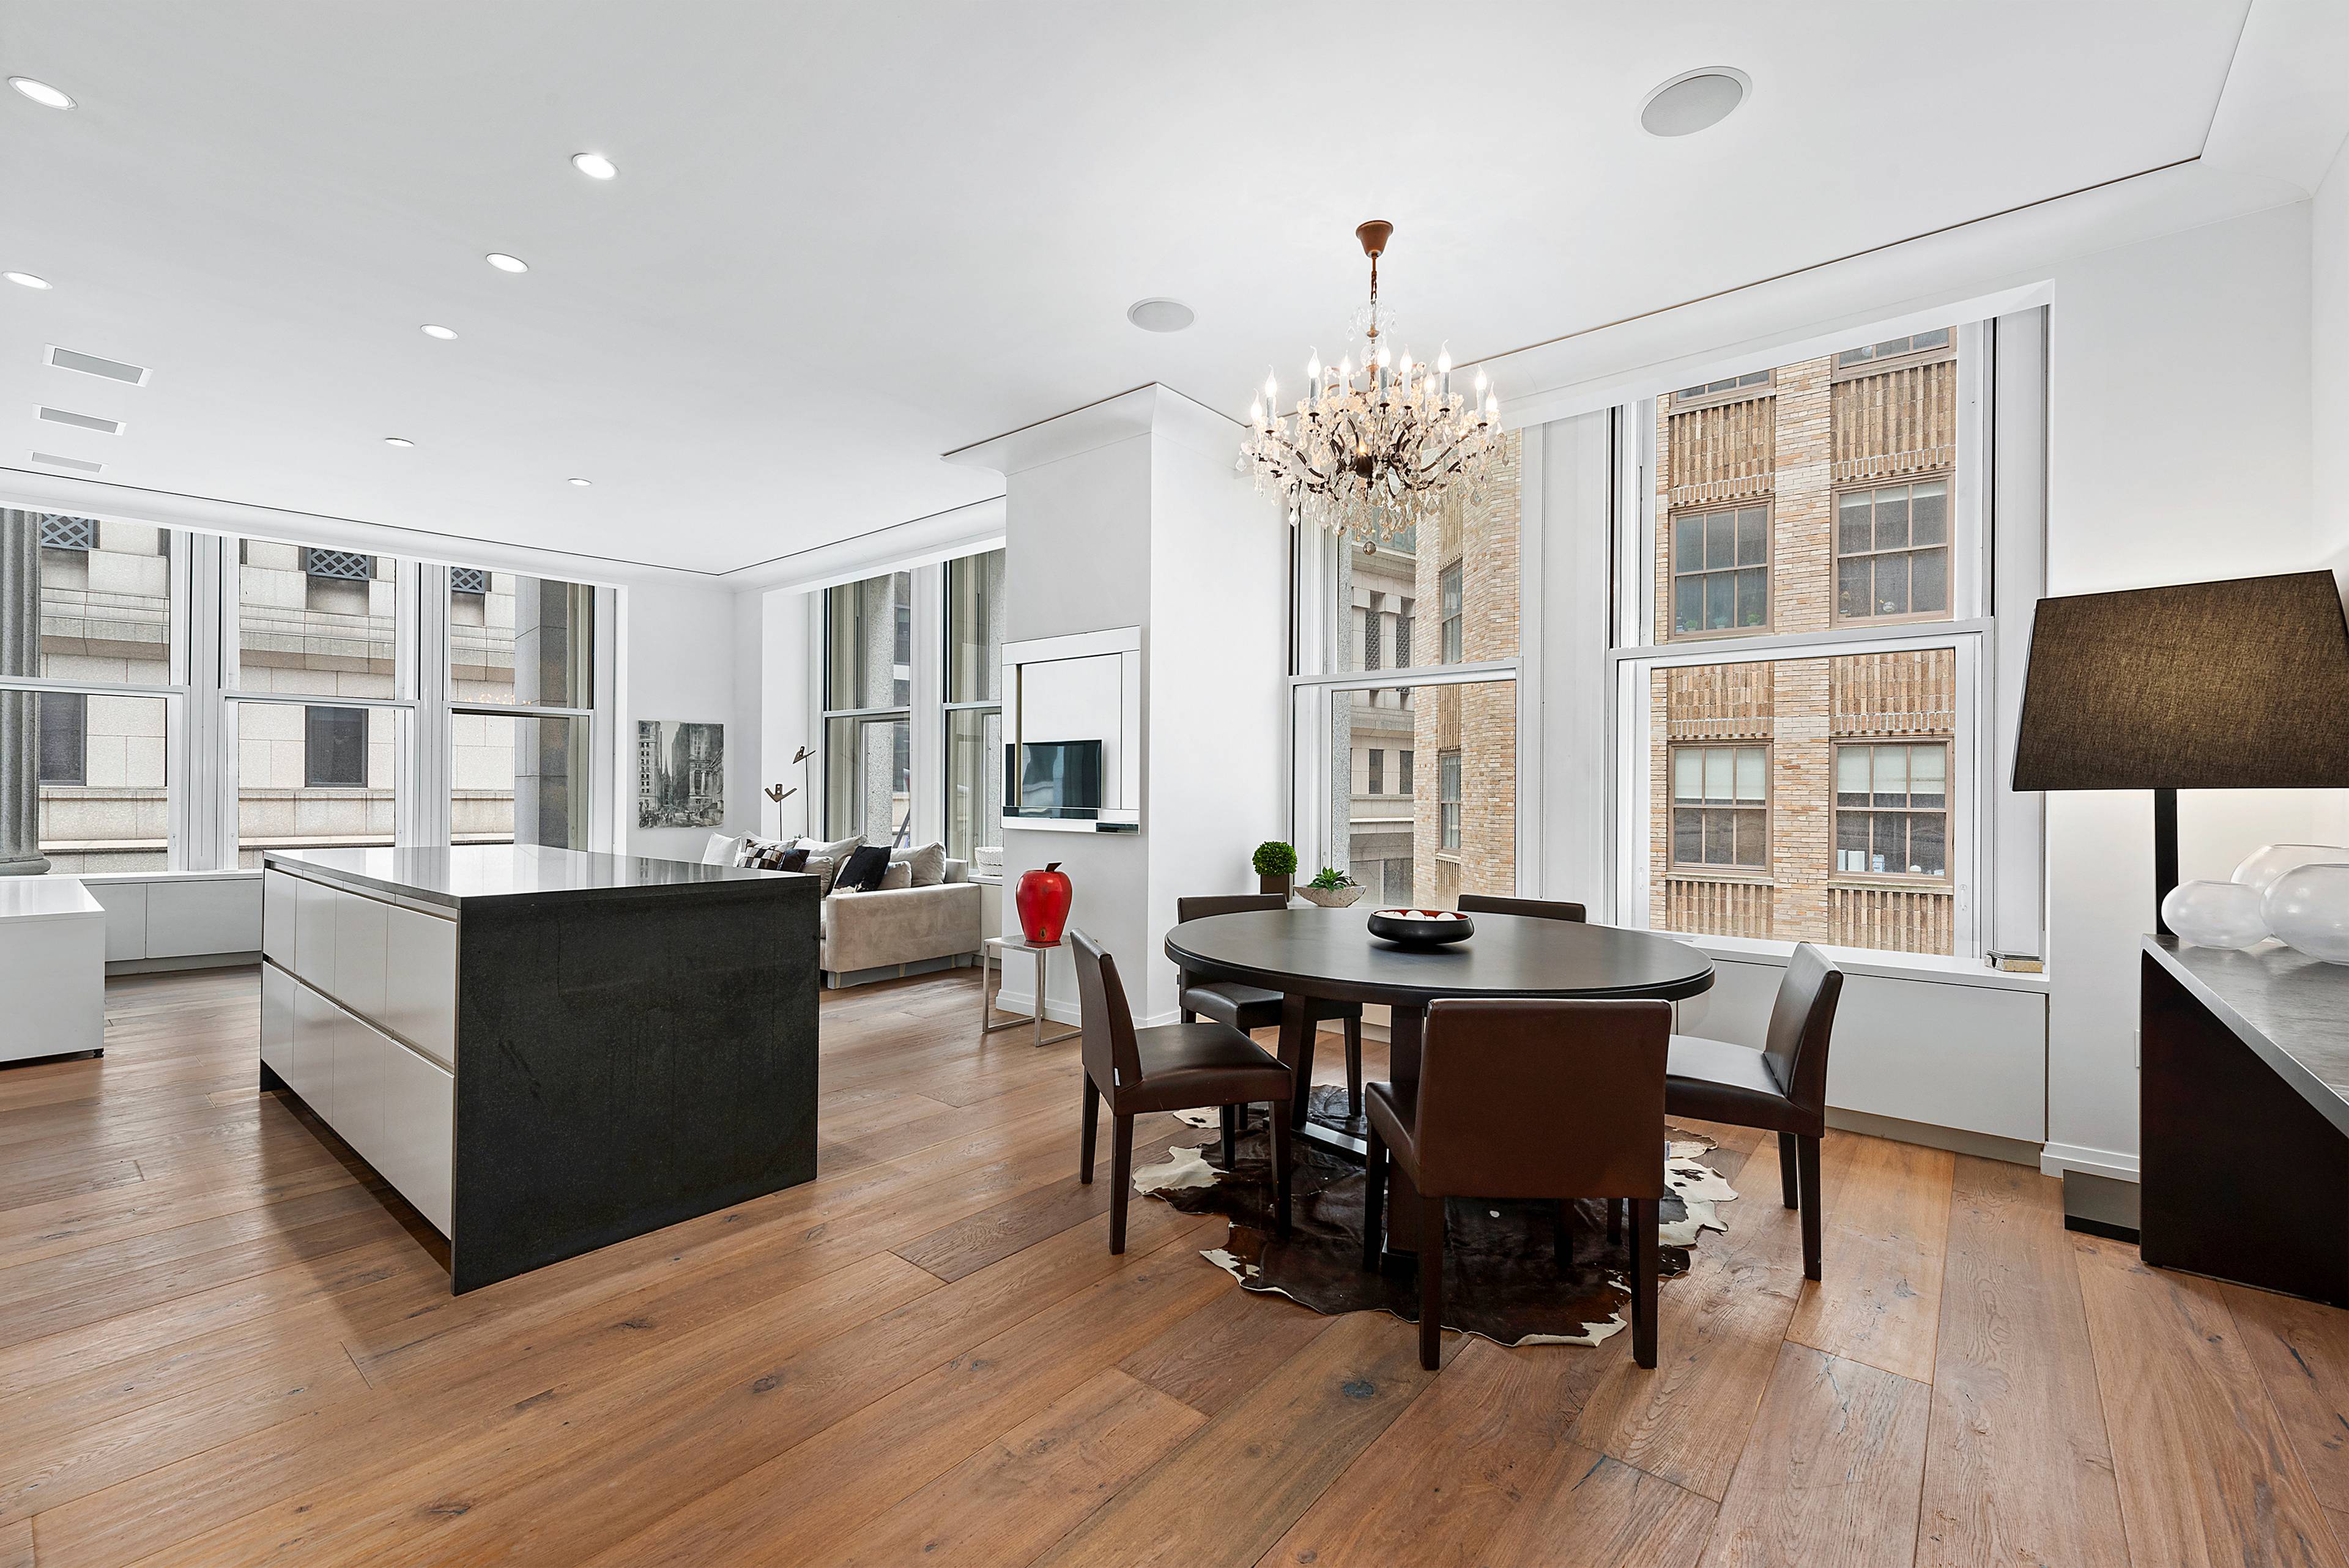 Savvy Downtown Buyers It s time to revisit Wall Street.